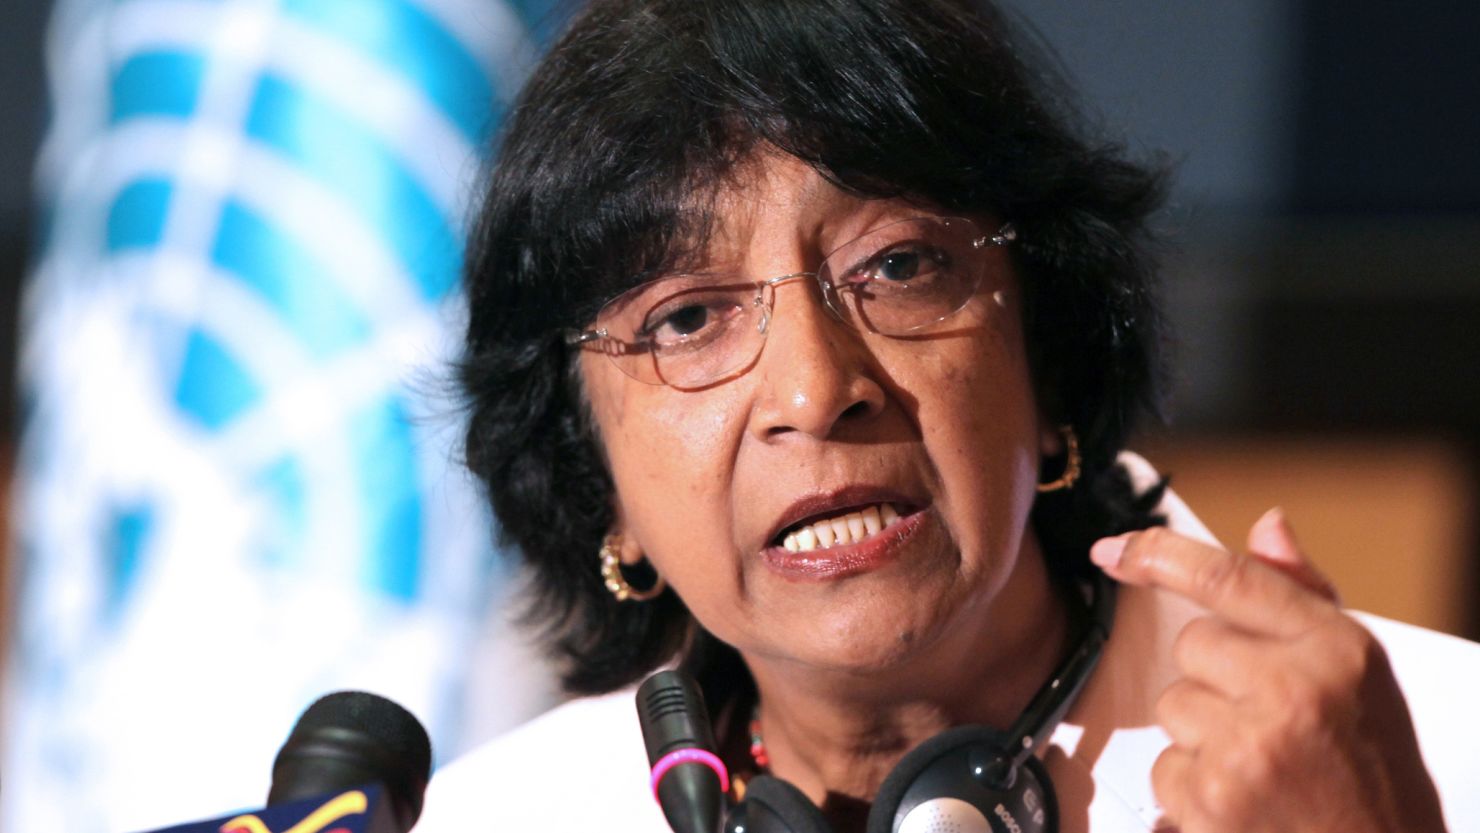  U.N.'s human rights chief Navi Pillay says there is massive evidence for war crimes in Syria.